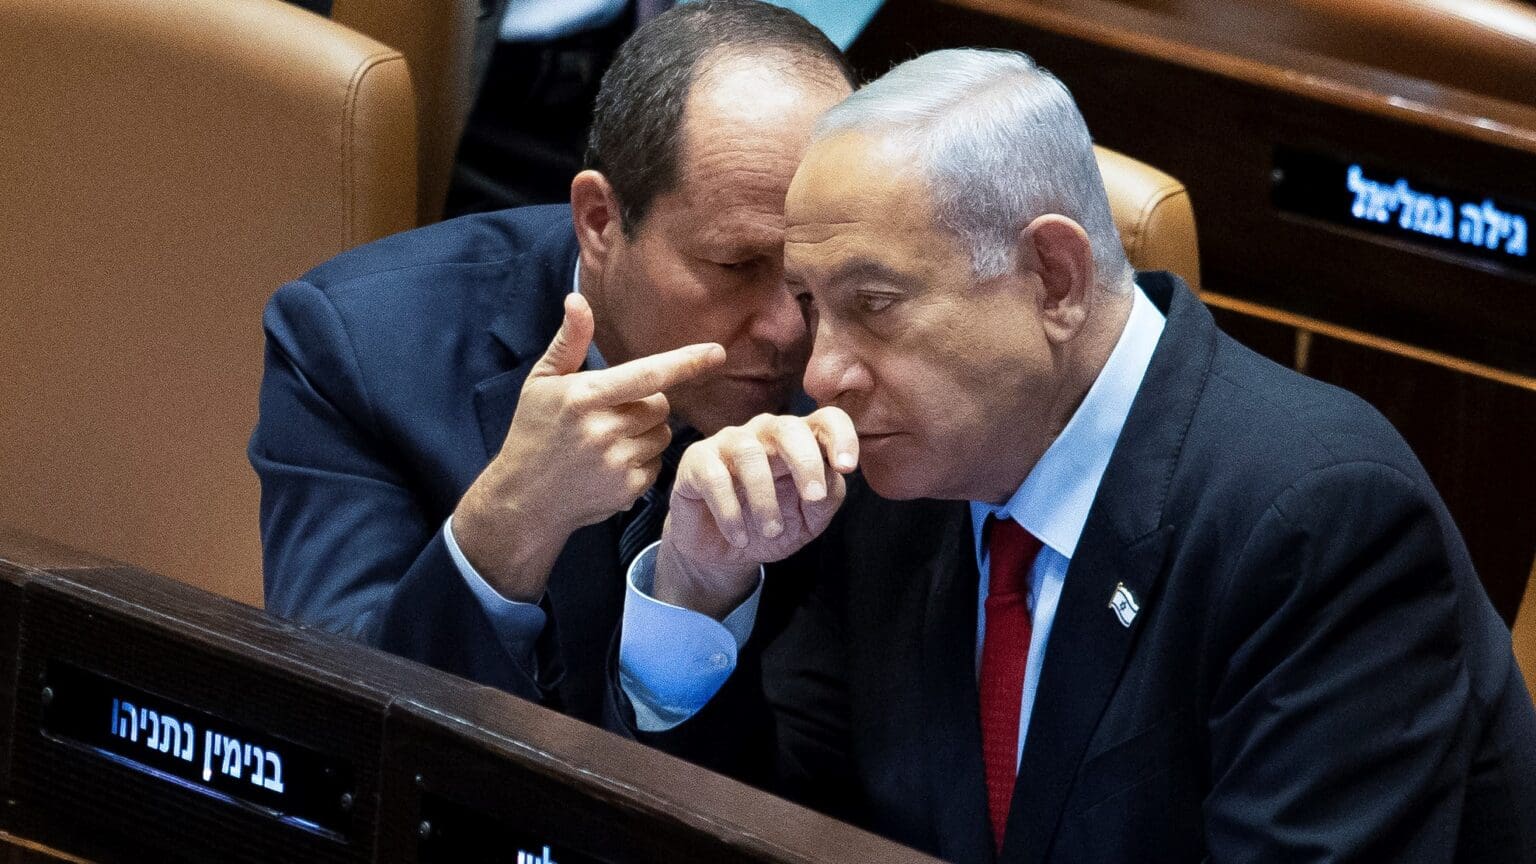 Is Israel Truly Undermining Her Democracy? — A Response to Kim Lane Scheppele